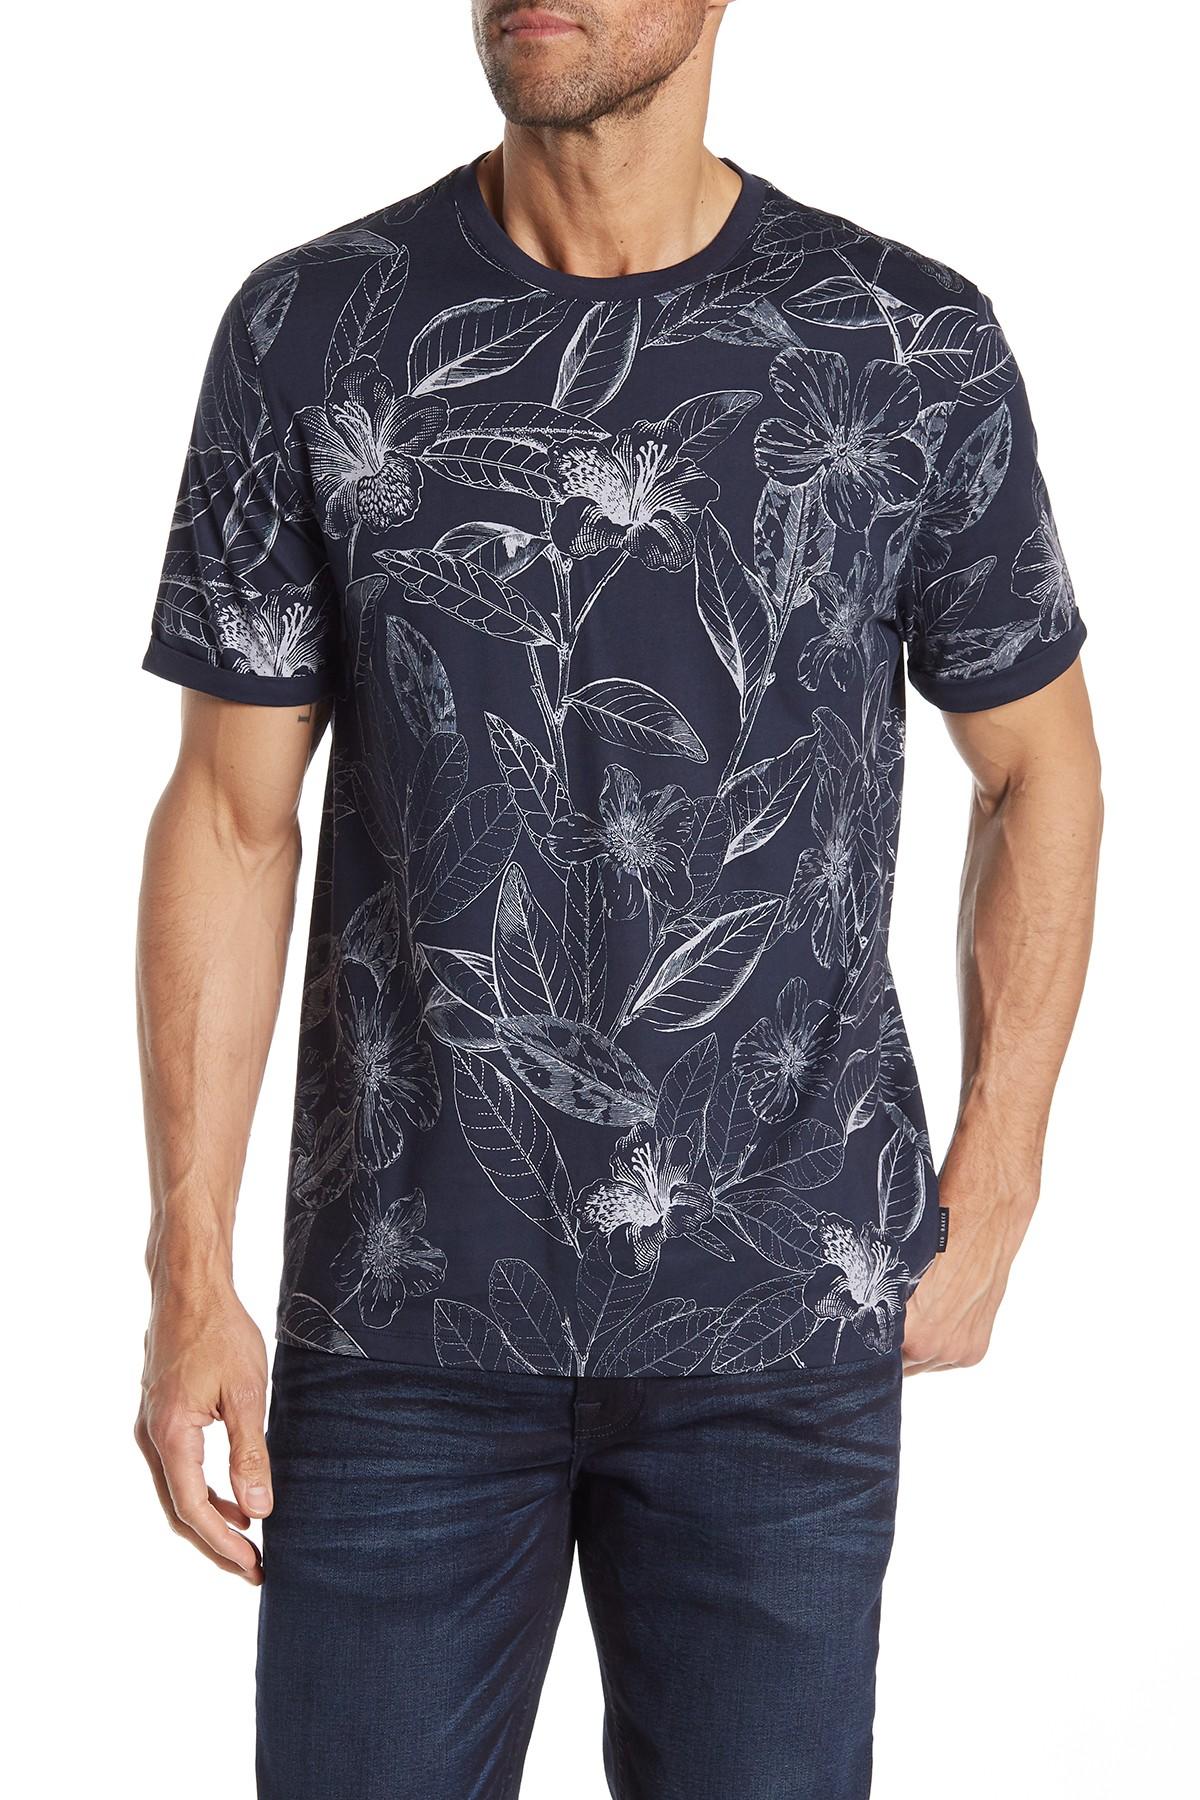 Ted Baker Cotton Short Sleeve Floral Printed T-shirt in Navy (Blue) for